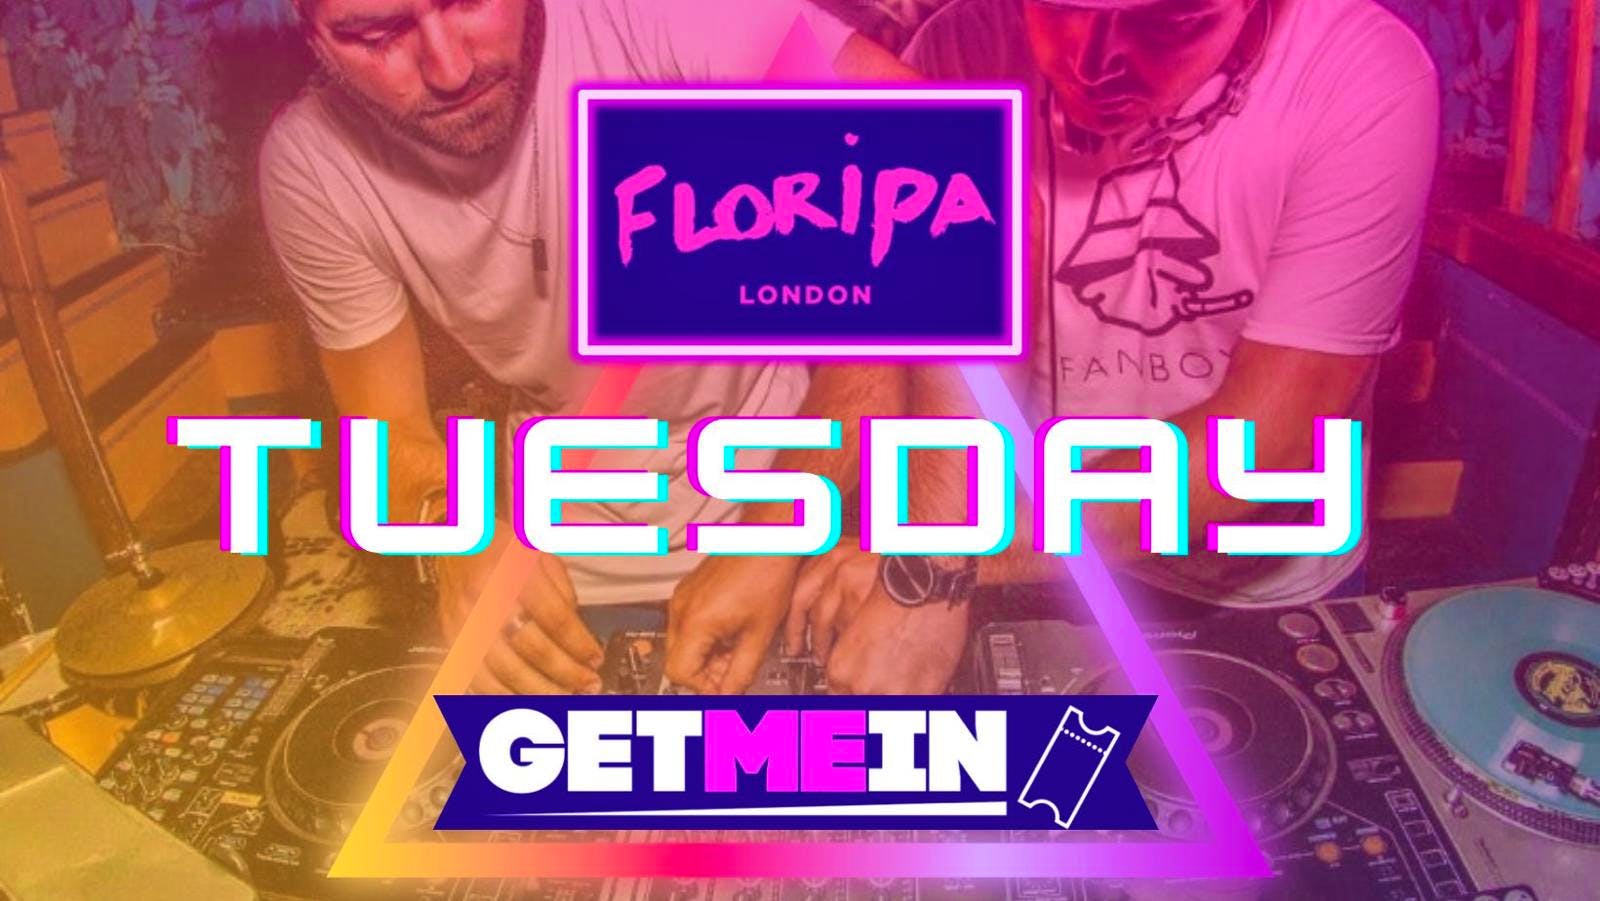 Shoreditch HipHop & RnB Party // Floripa Shoreditch // Every Tuesday